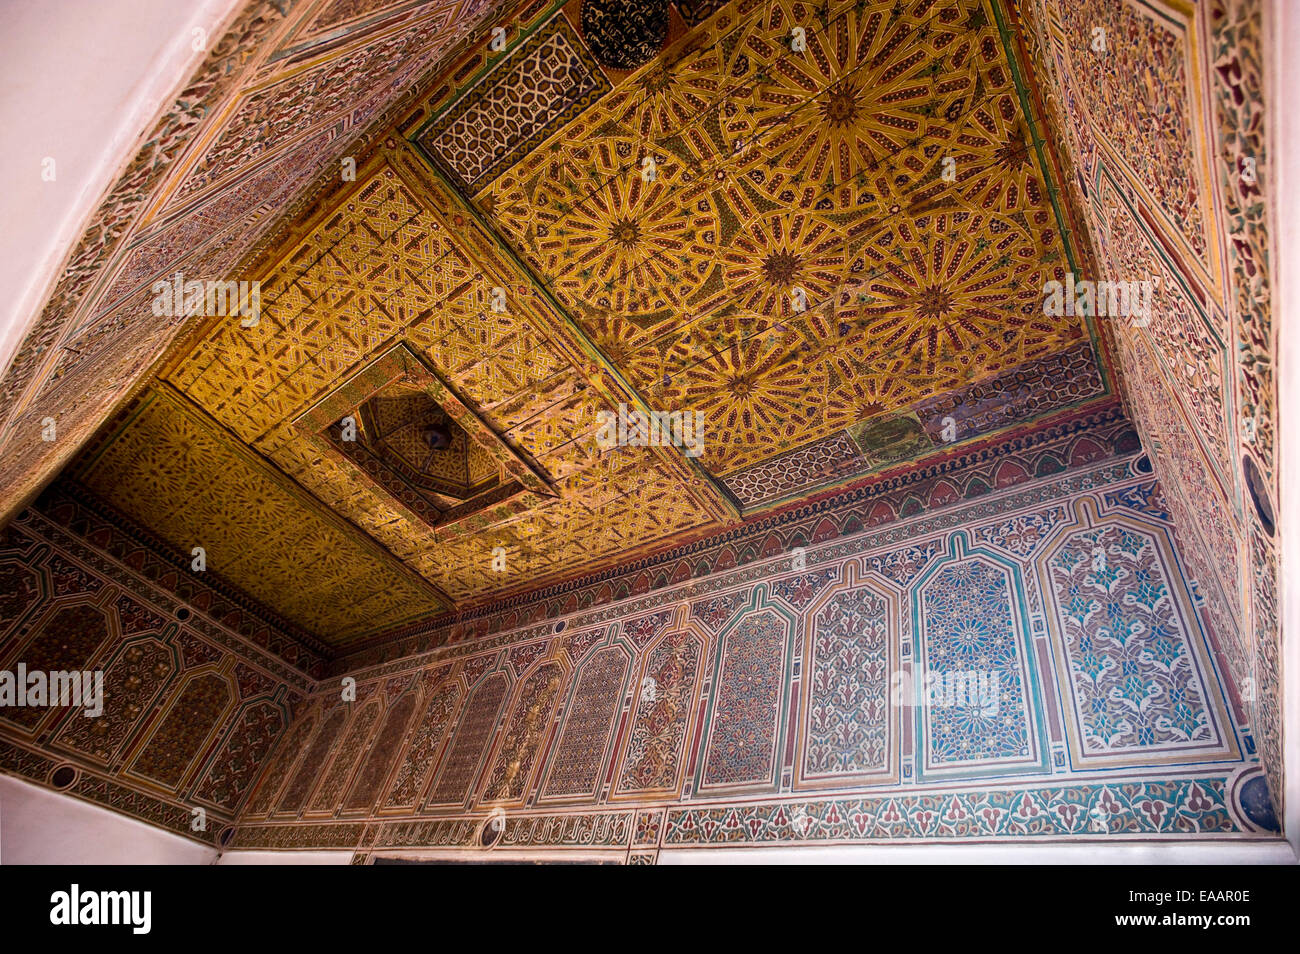 Horizontal close up of the beautiful ornate ceiling inside Kasbah Taourirt in Ouarzazate. Stock Photo